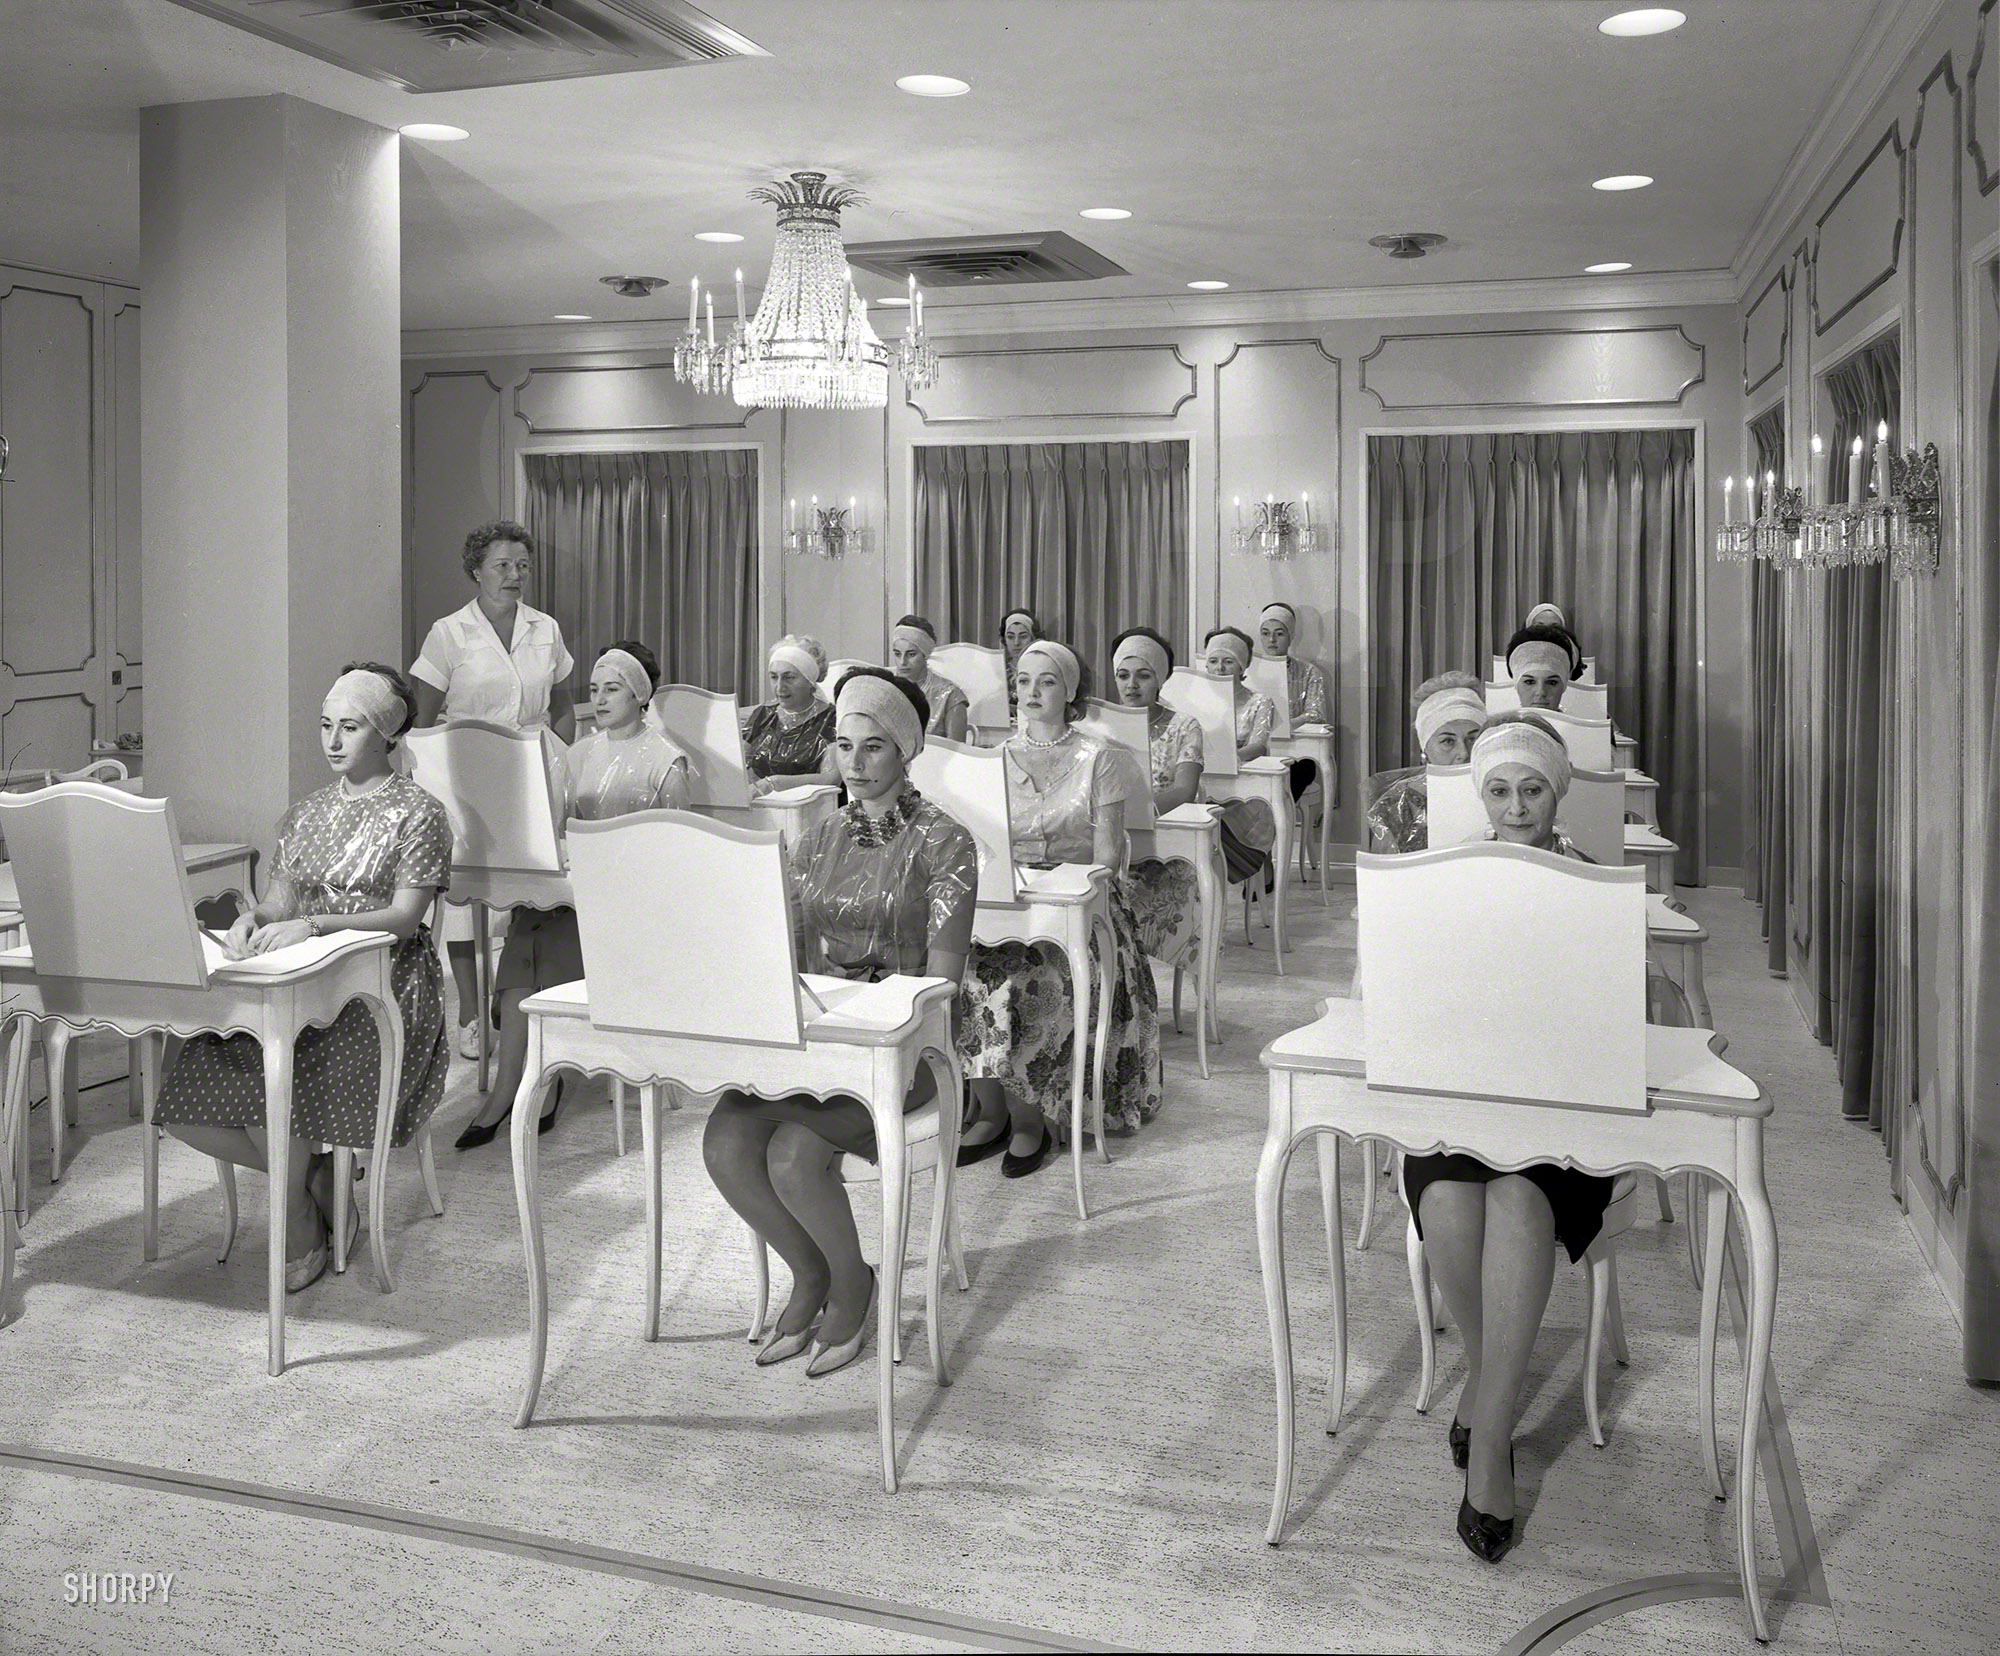 September 15, 1961. "Helena Rubinstein, 655 Fifth Avenue, New York. Class in session." Large-format acetate negative by Gottscho-Schleisner. View full size.